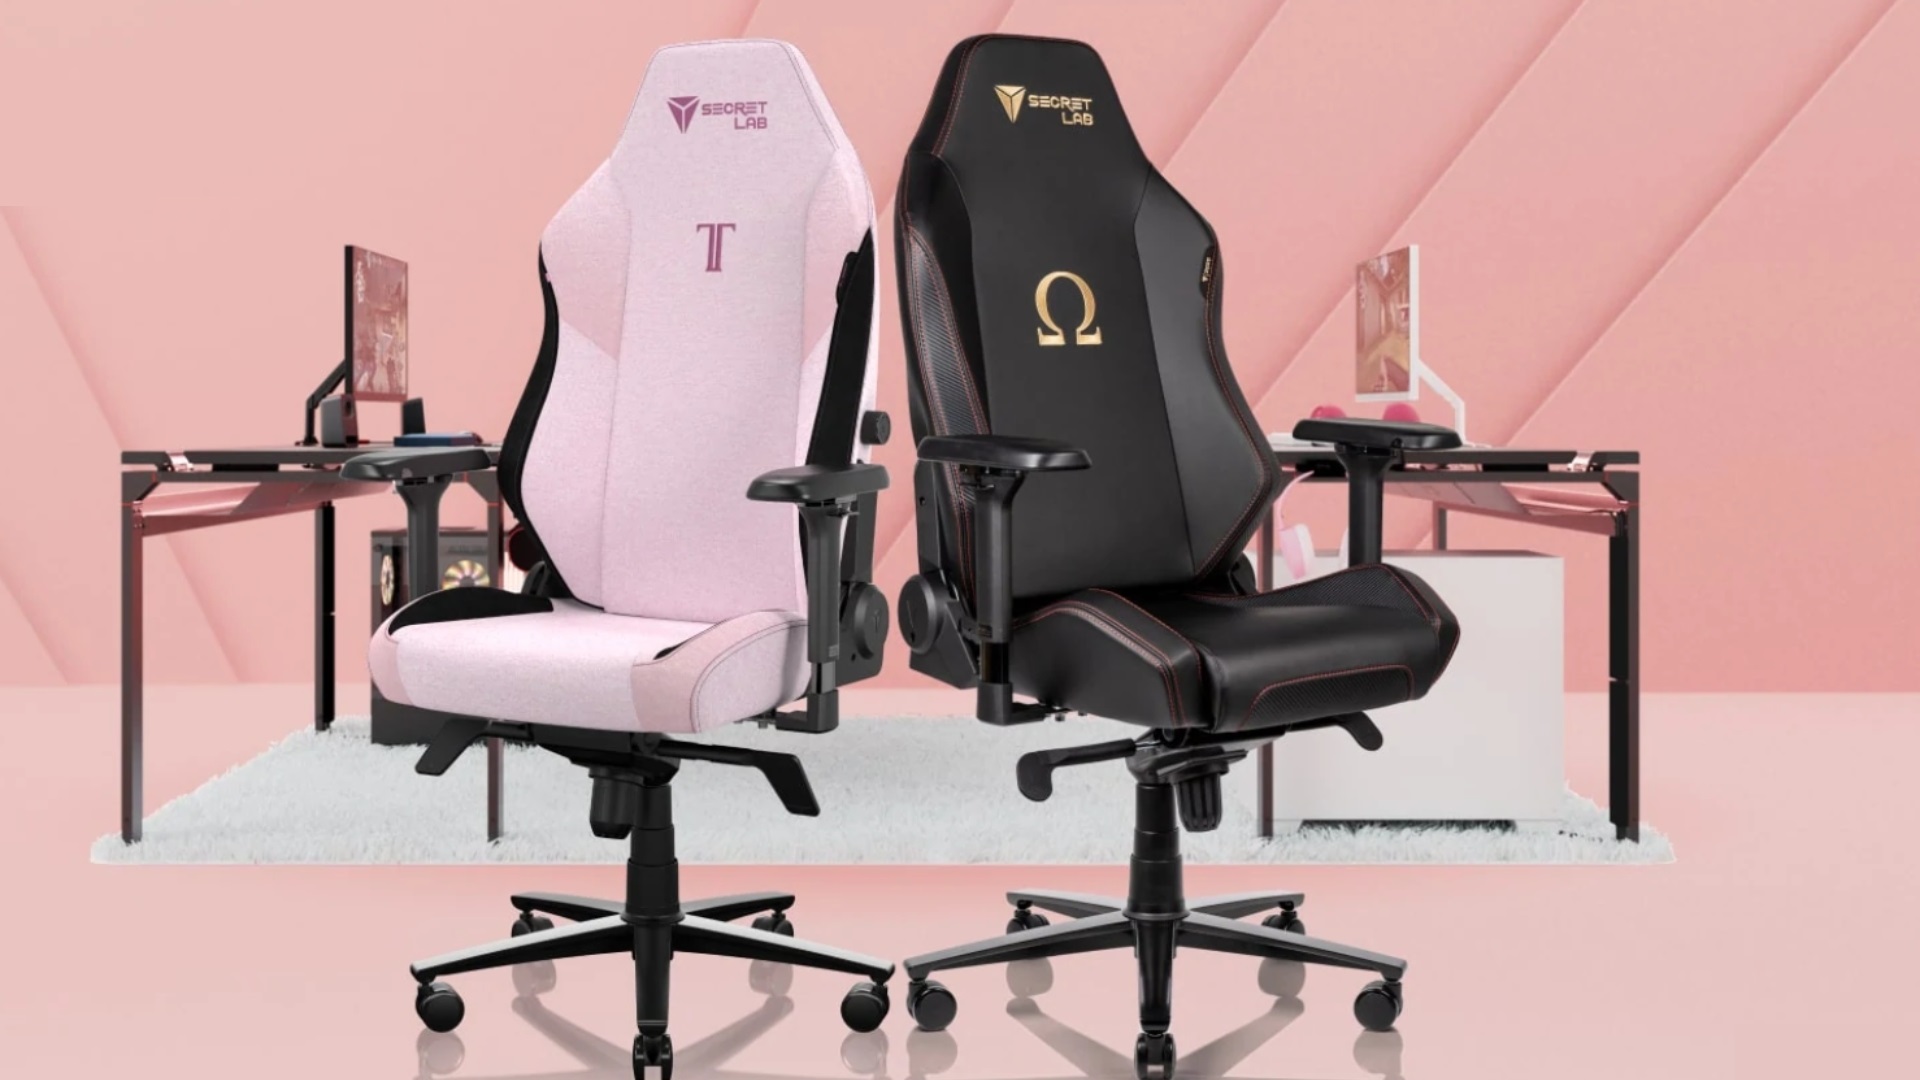 Love is in the chair – save up to $130 on Secretlab chairs for Valentine's Day